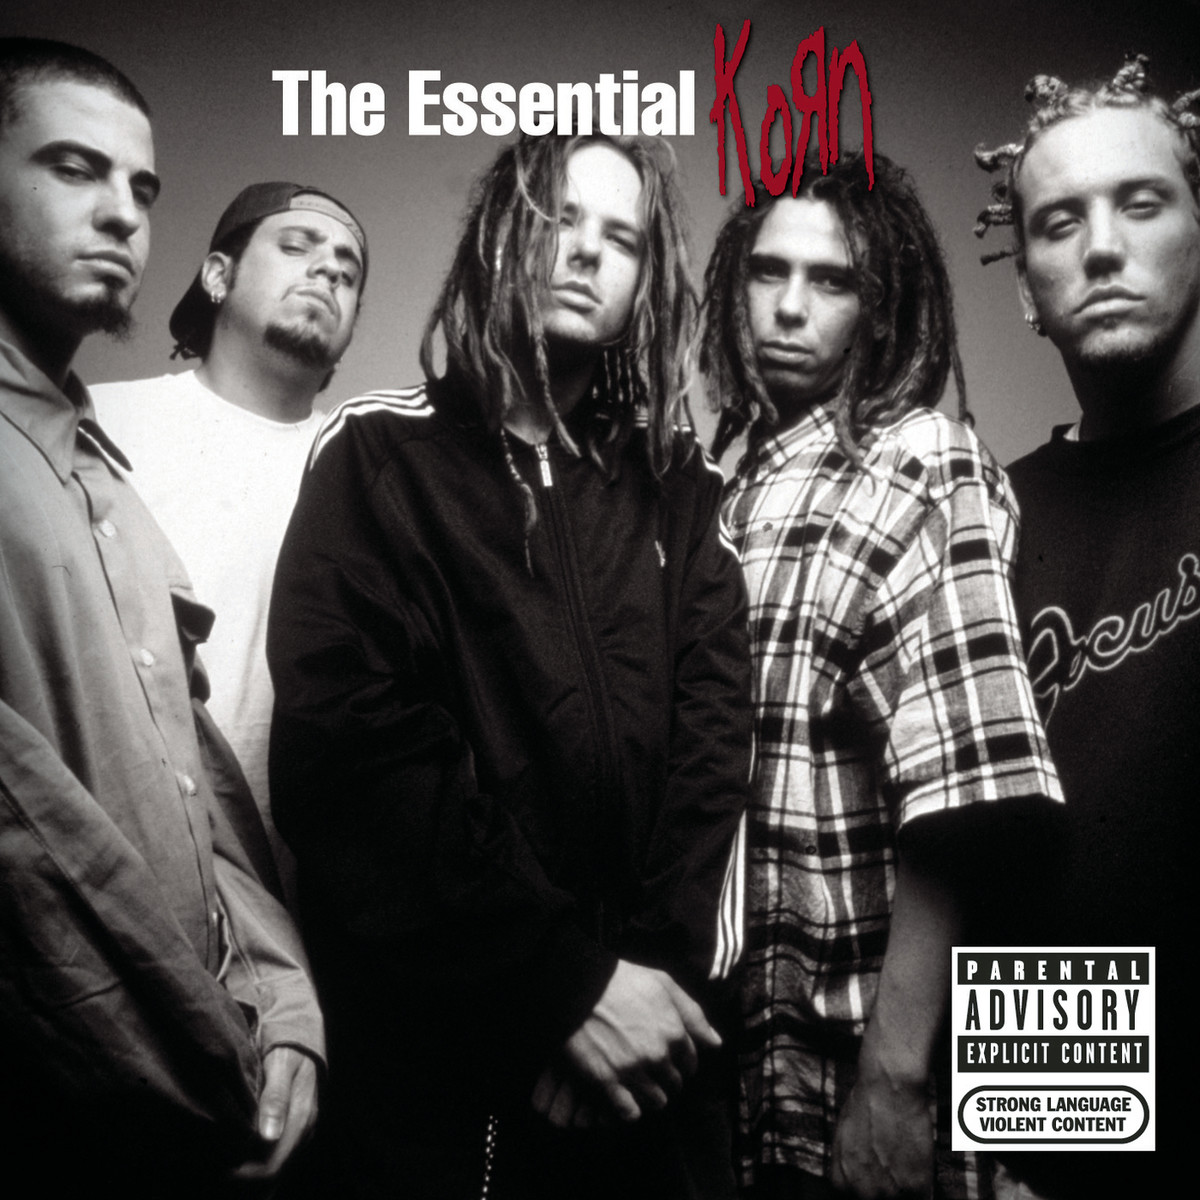 A.D.I.D.A.S. MP3 Song Download- The Essential Korn A.D.I.D.A.S. Song by Korn  on Gaana.com